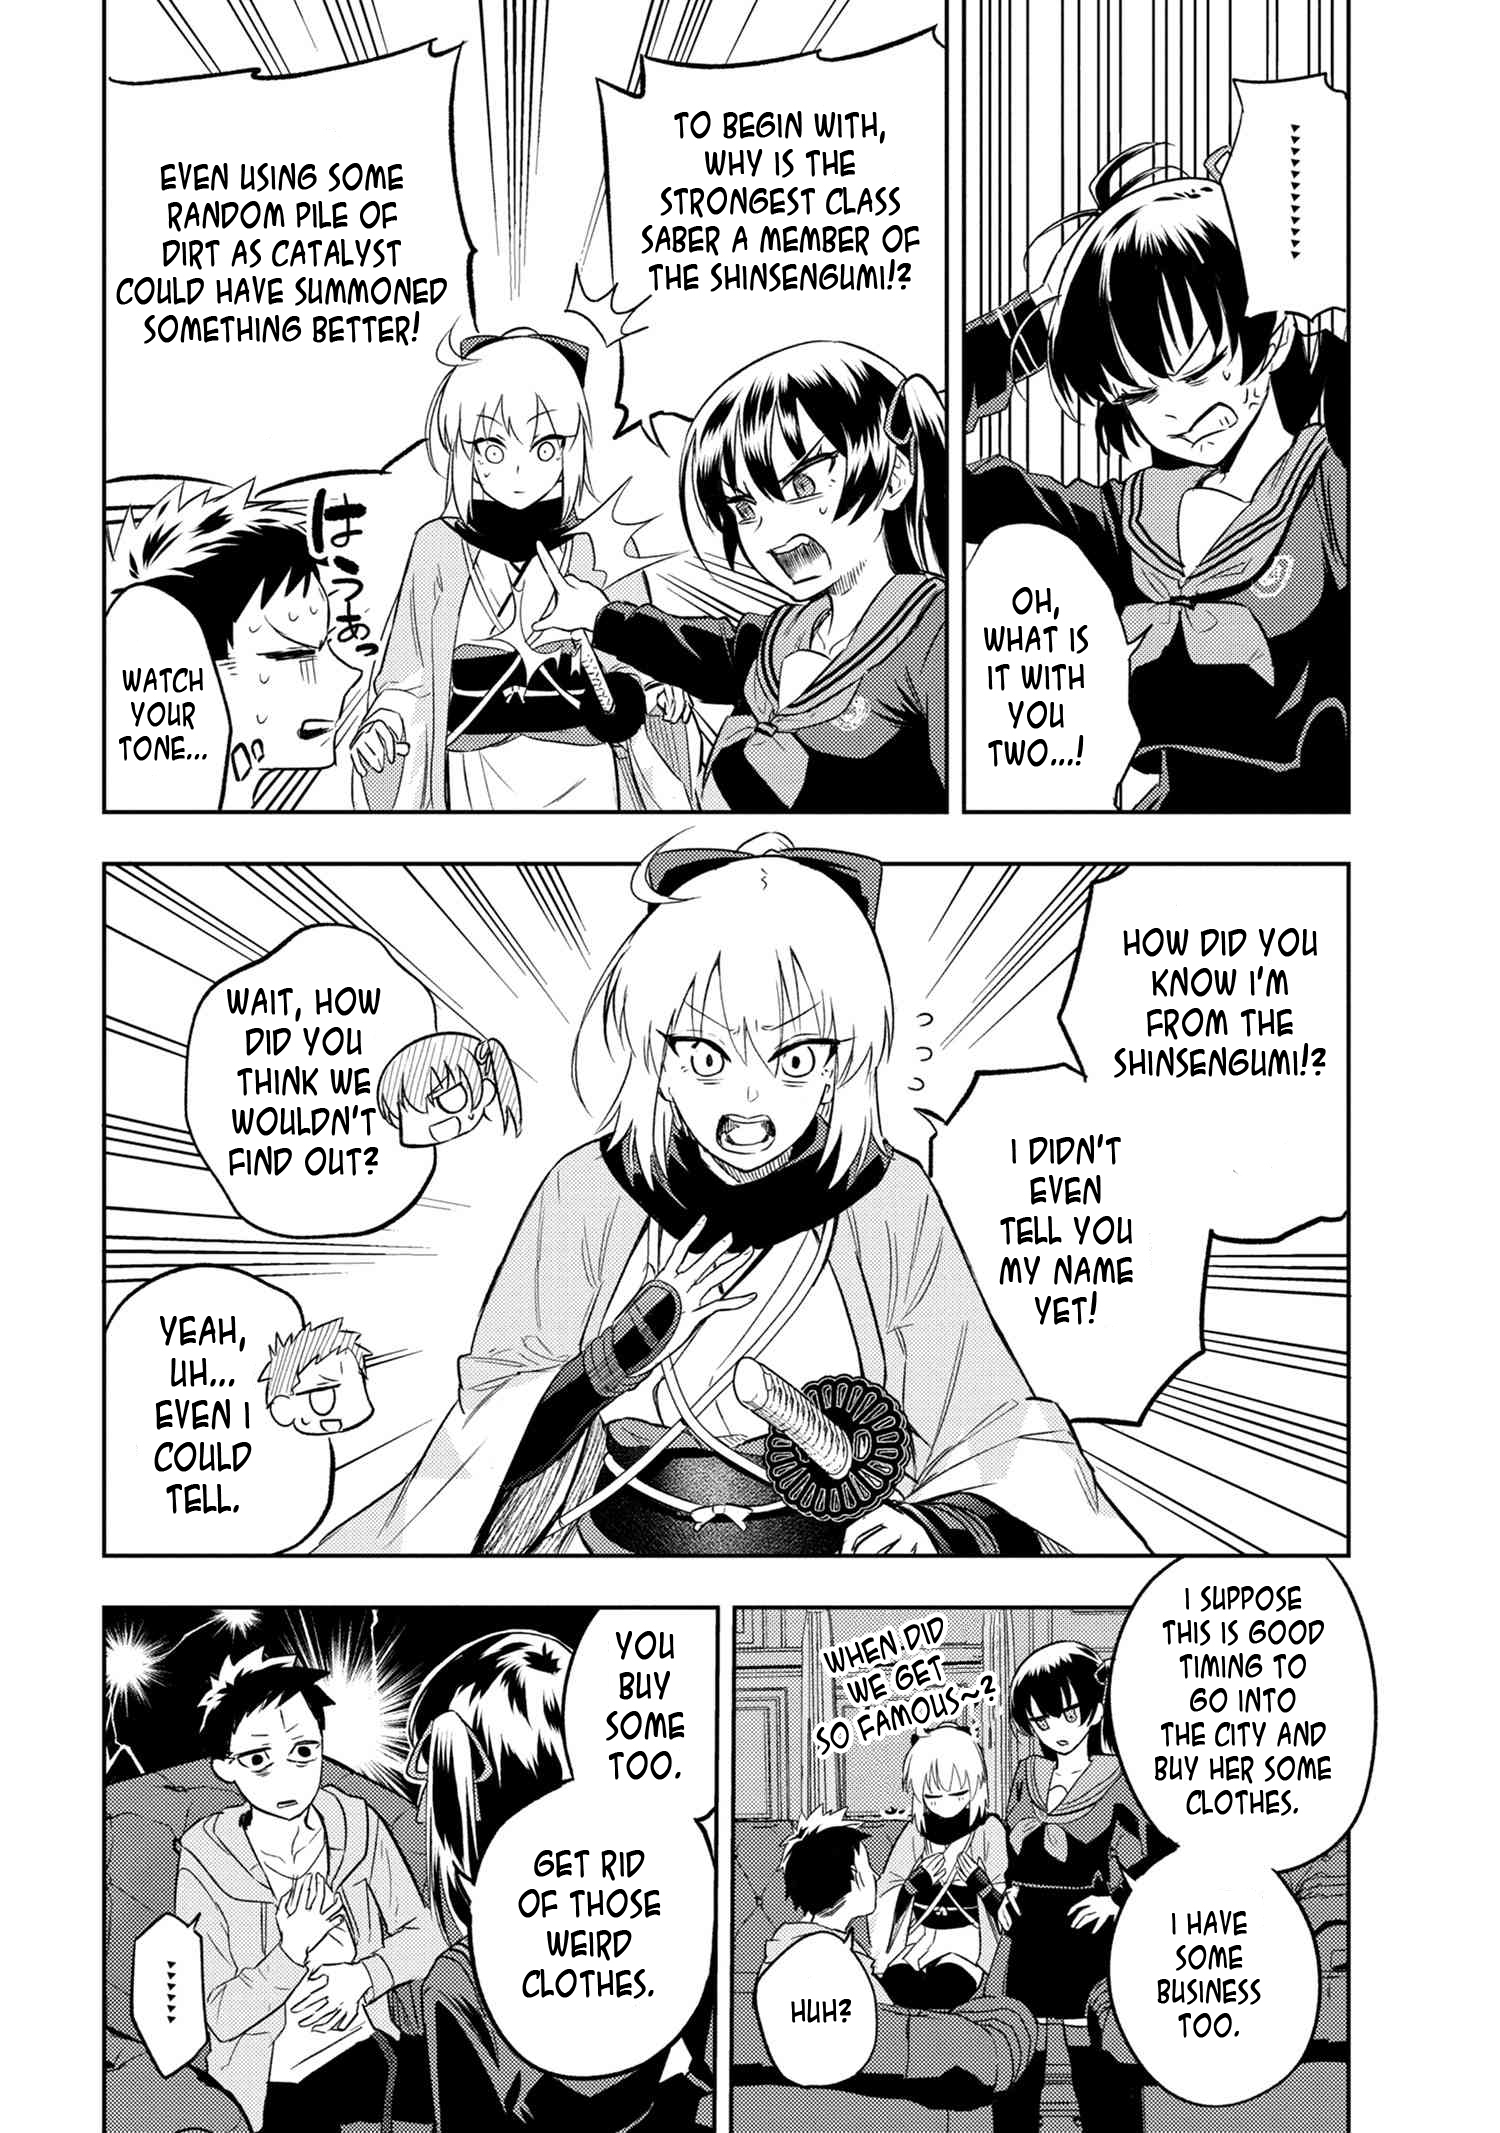 Fate/type Redline Vol.1 Chapter 3.3